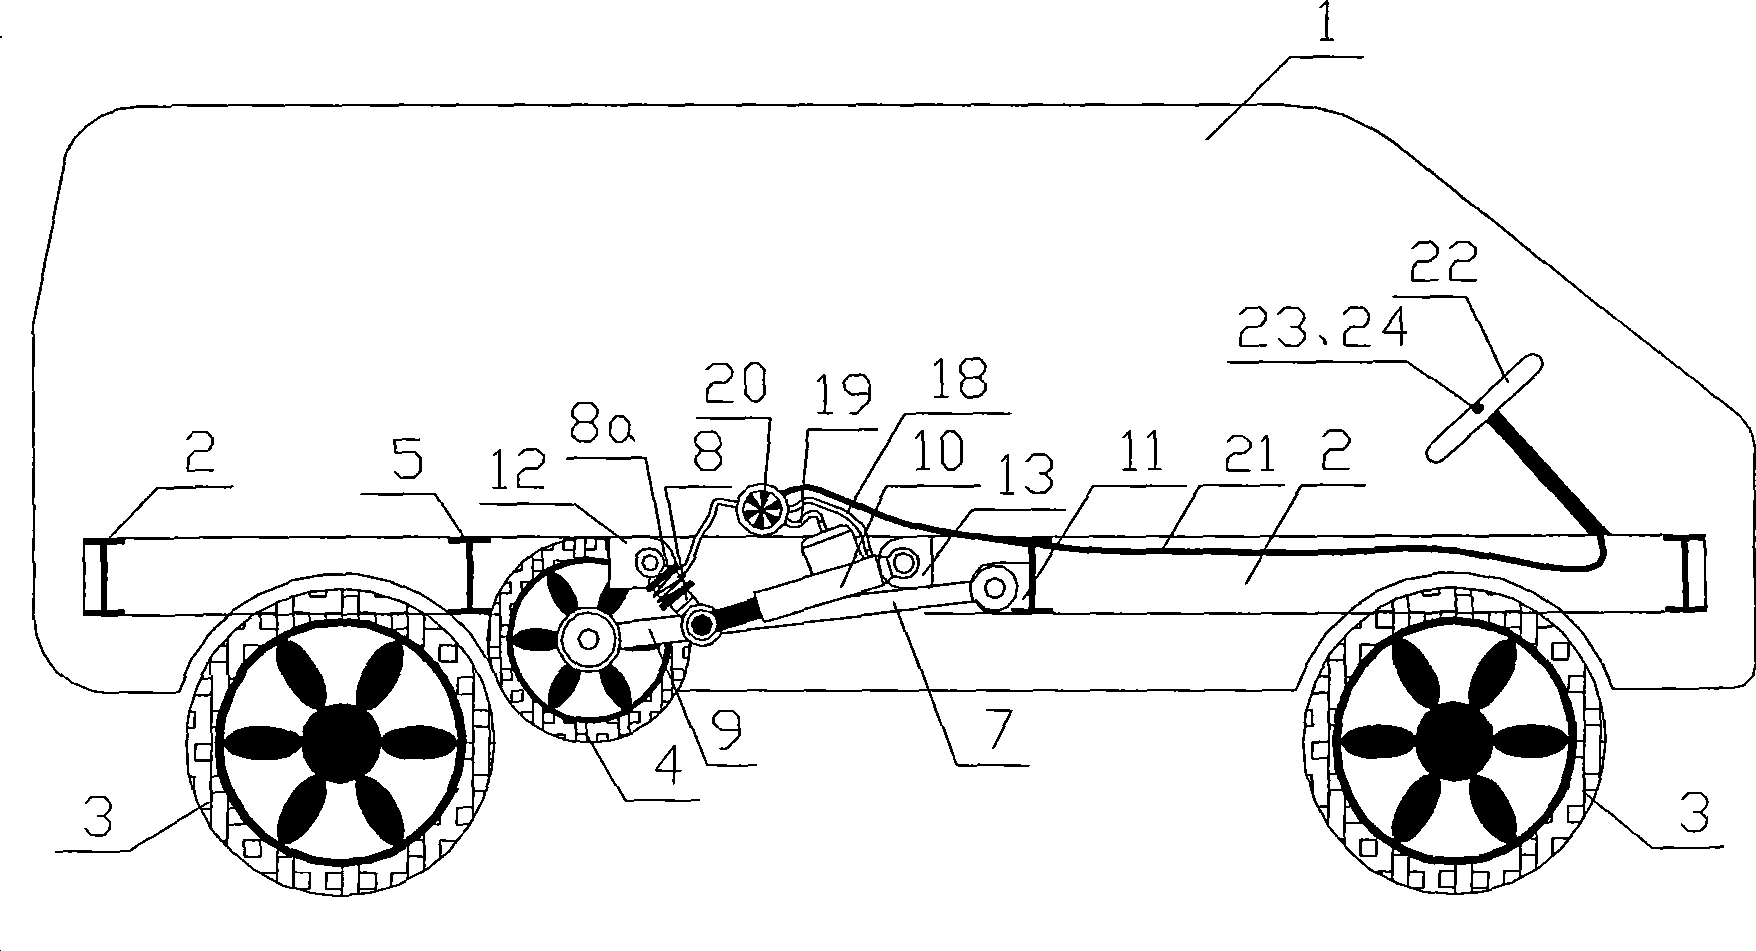 Automobile reinforcing brake auxiliary wheel system